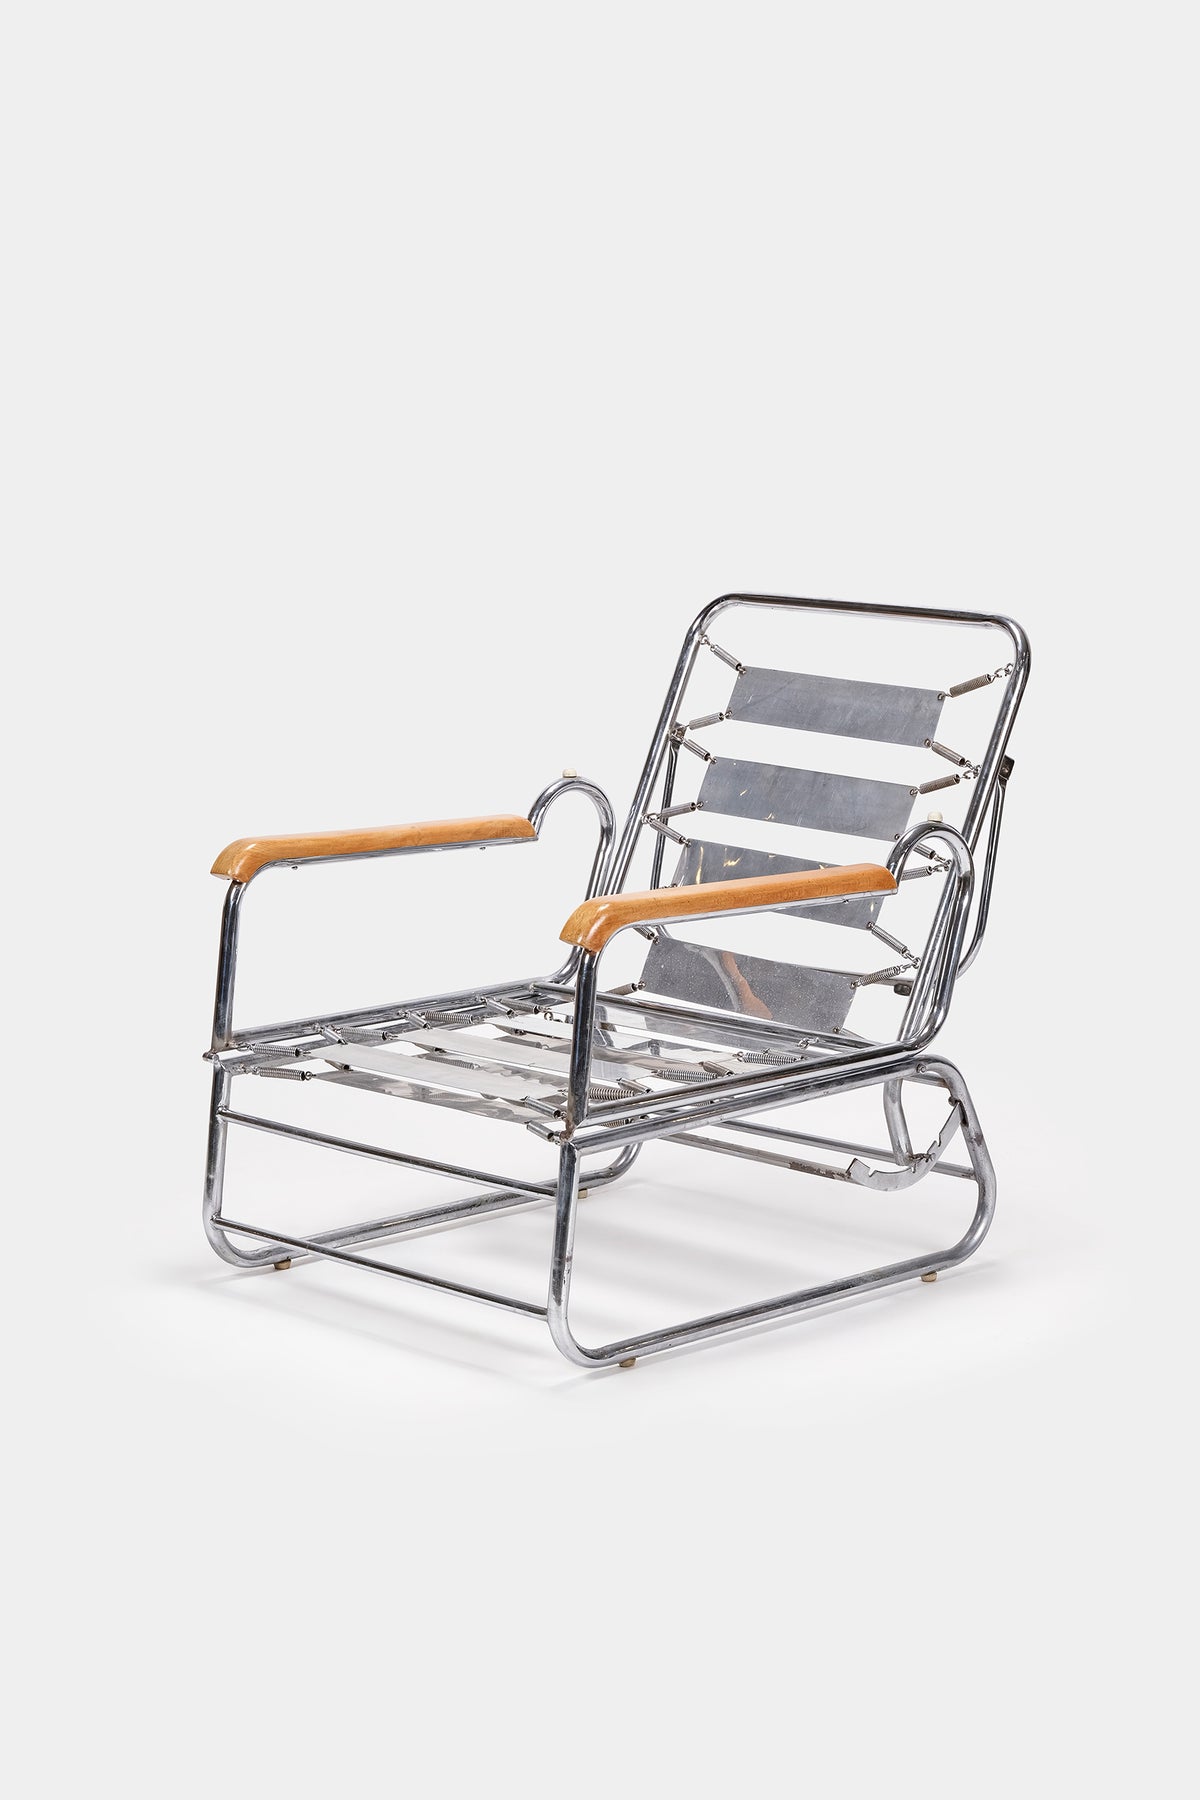 Deck Chair, Foldable, Italy, 30s